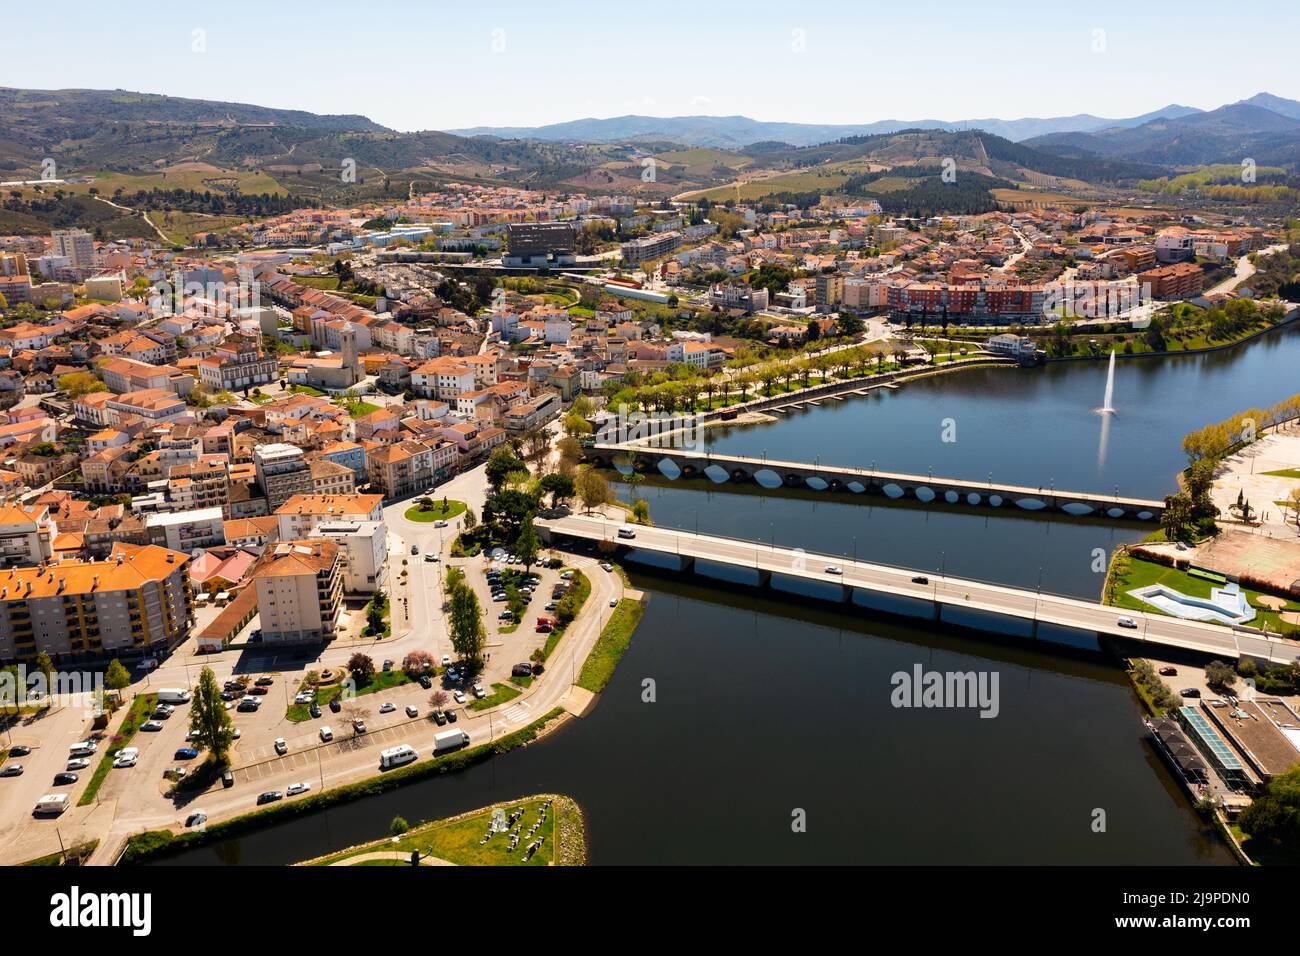 View from drone of Mirandela city, Portugal Stock Photo